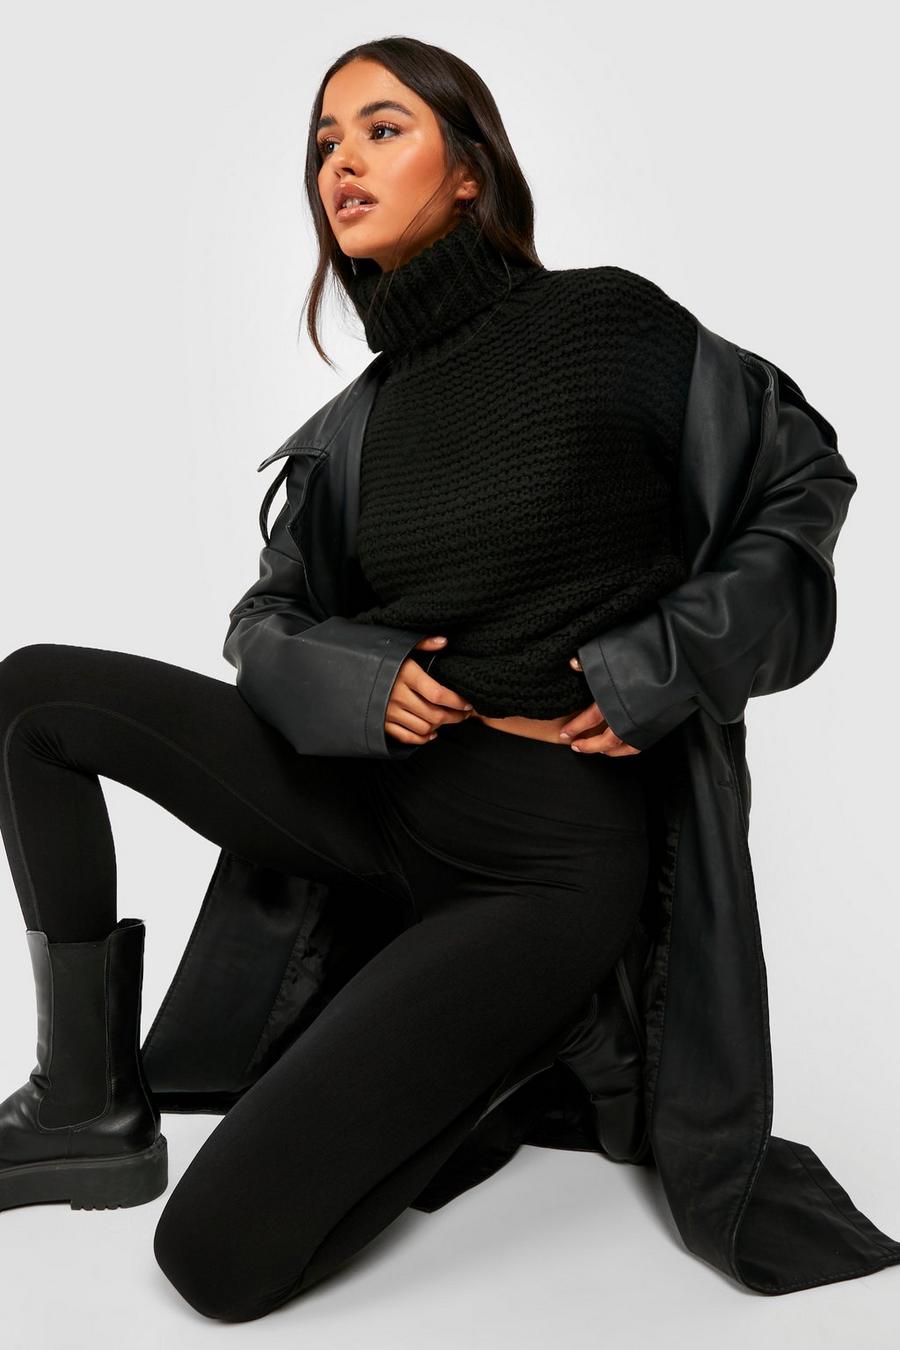 Black Knitted Turtleneck Sweater